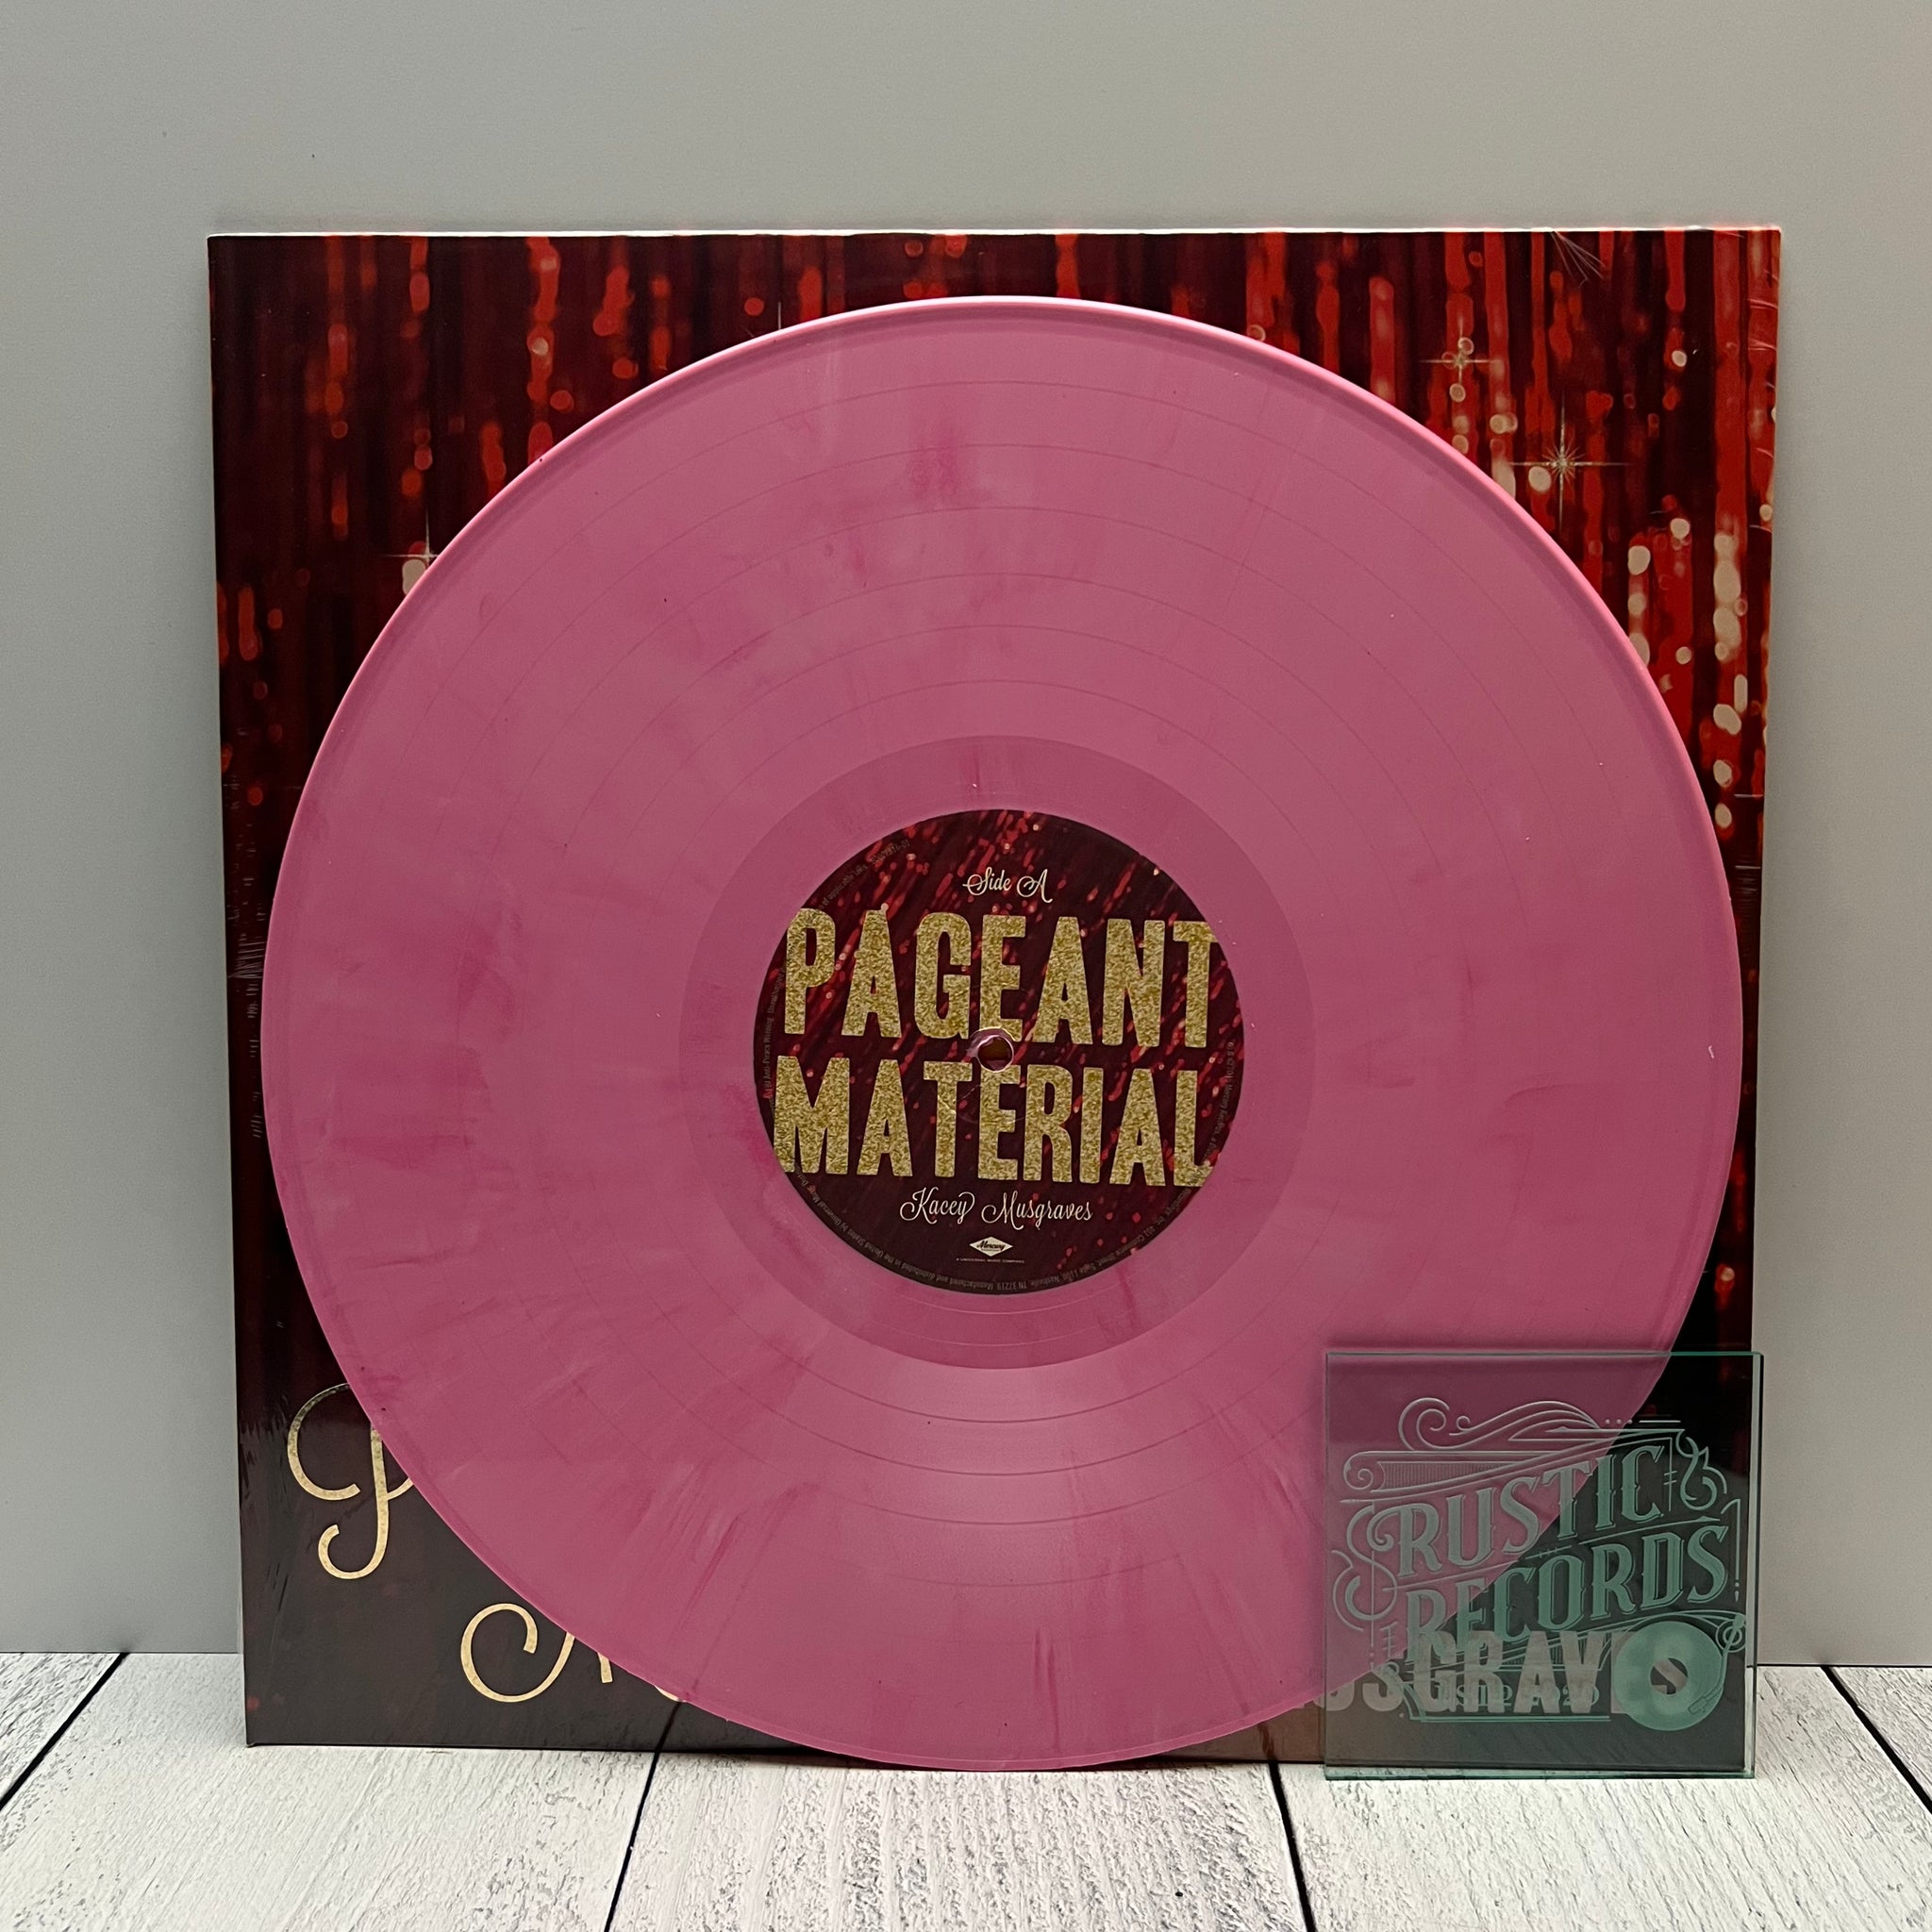 Kacey Musgraves - Pageant Material (Pink Marble Vinyl)